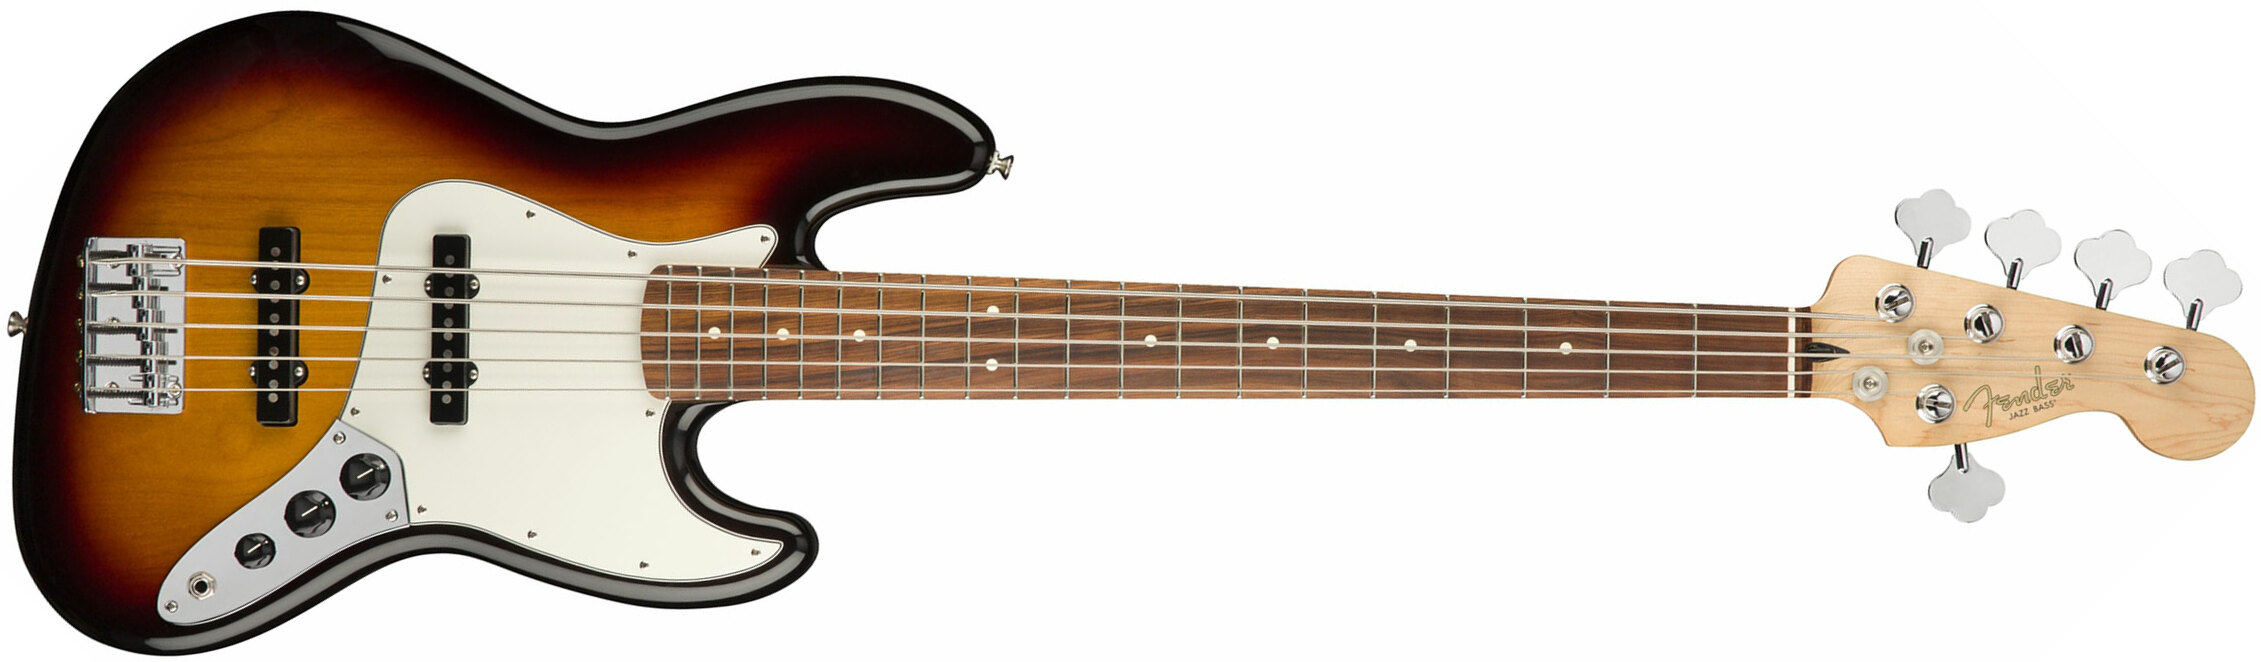 Fender Jazz Bass Player V 5-cordes Mex Pf - 3-color Sunburst - Solid body electric bass - Main picture